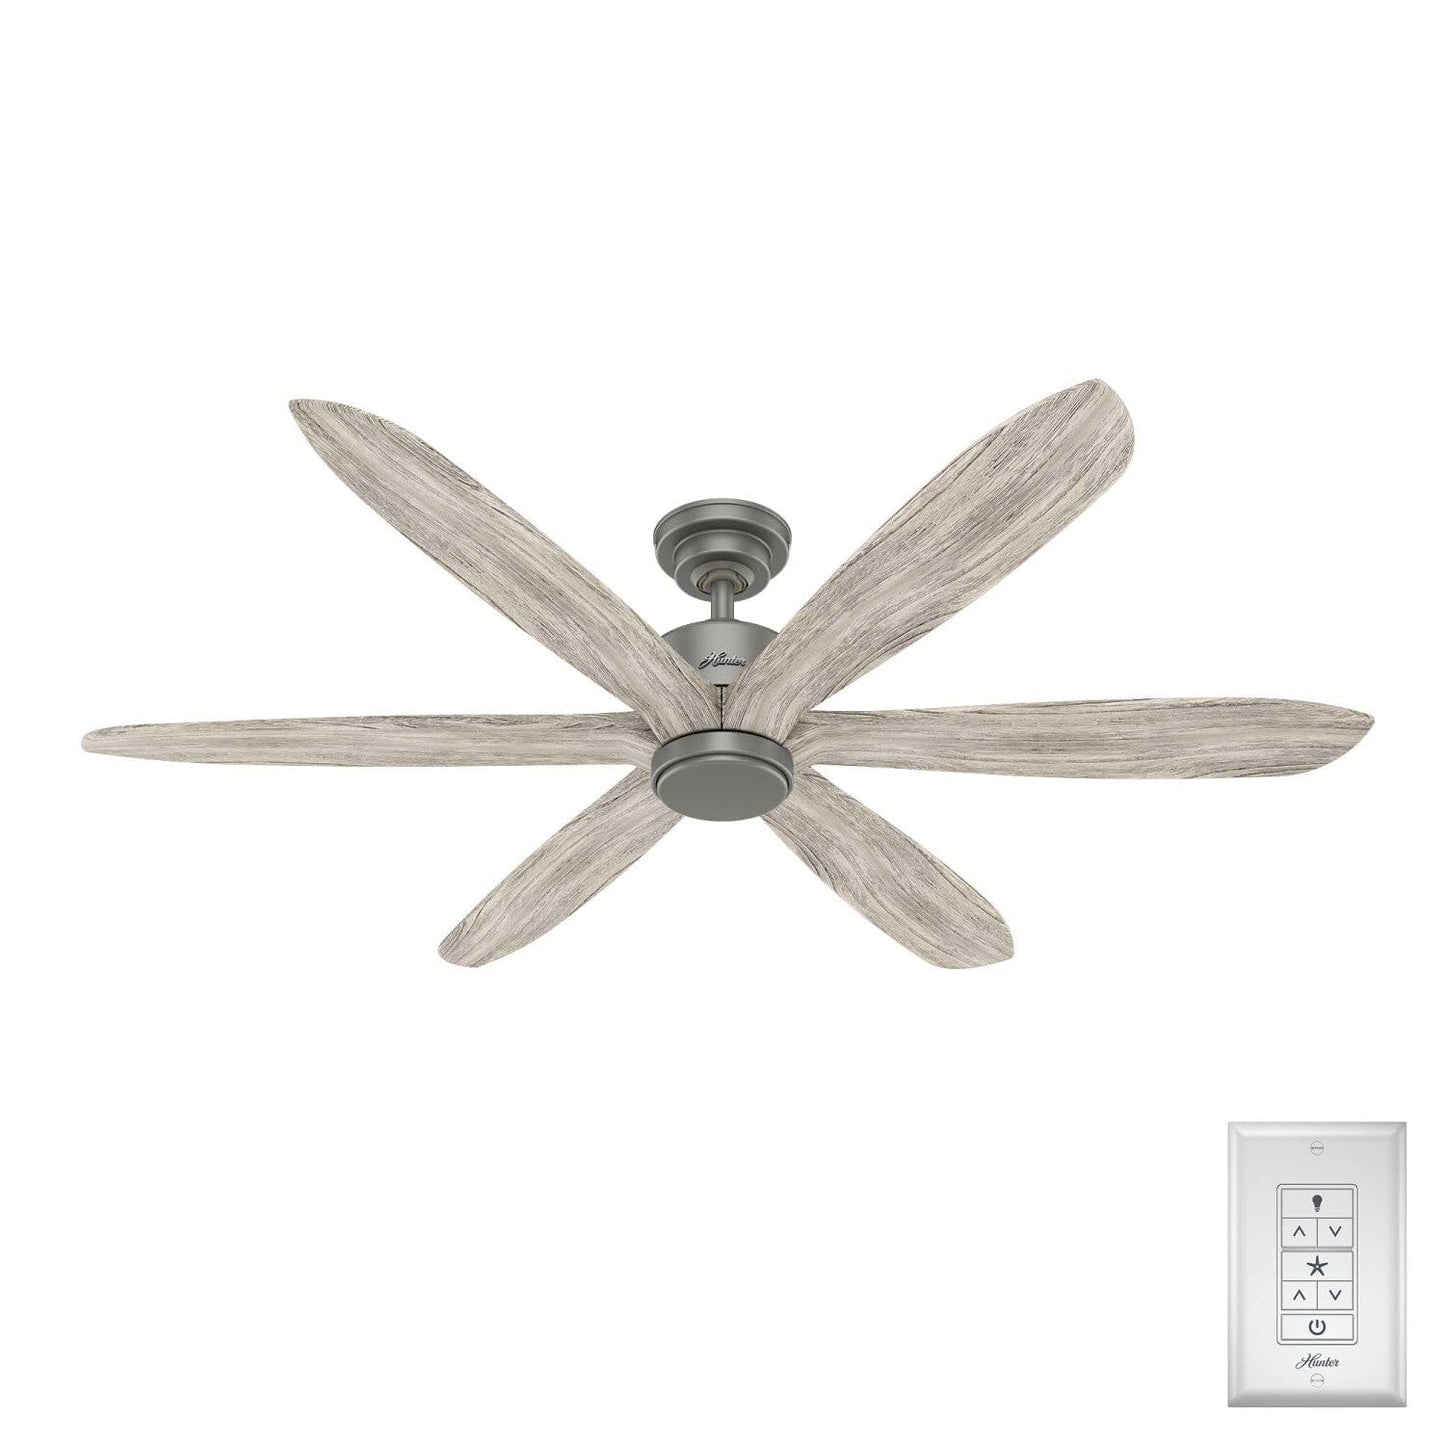 Rhinebeck 58 inch Ceiling Fans Hunter Matte Silver - Weathered White Birch 